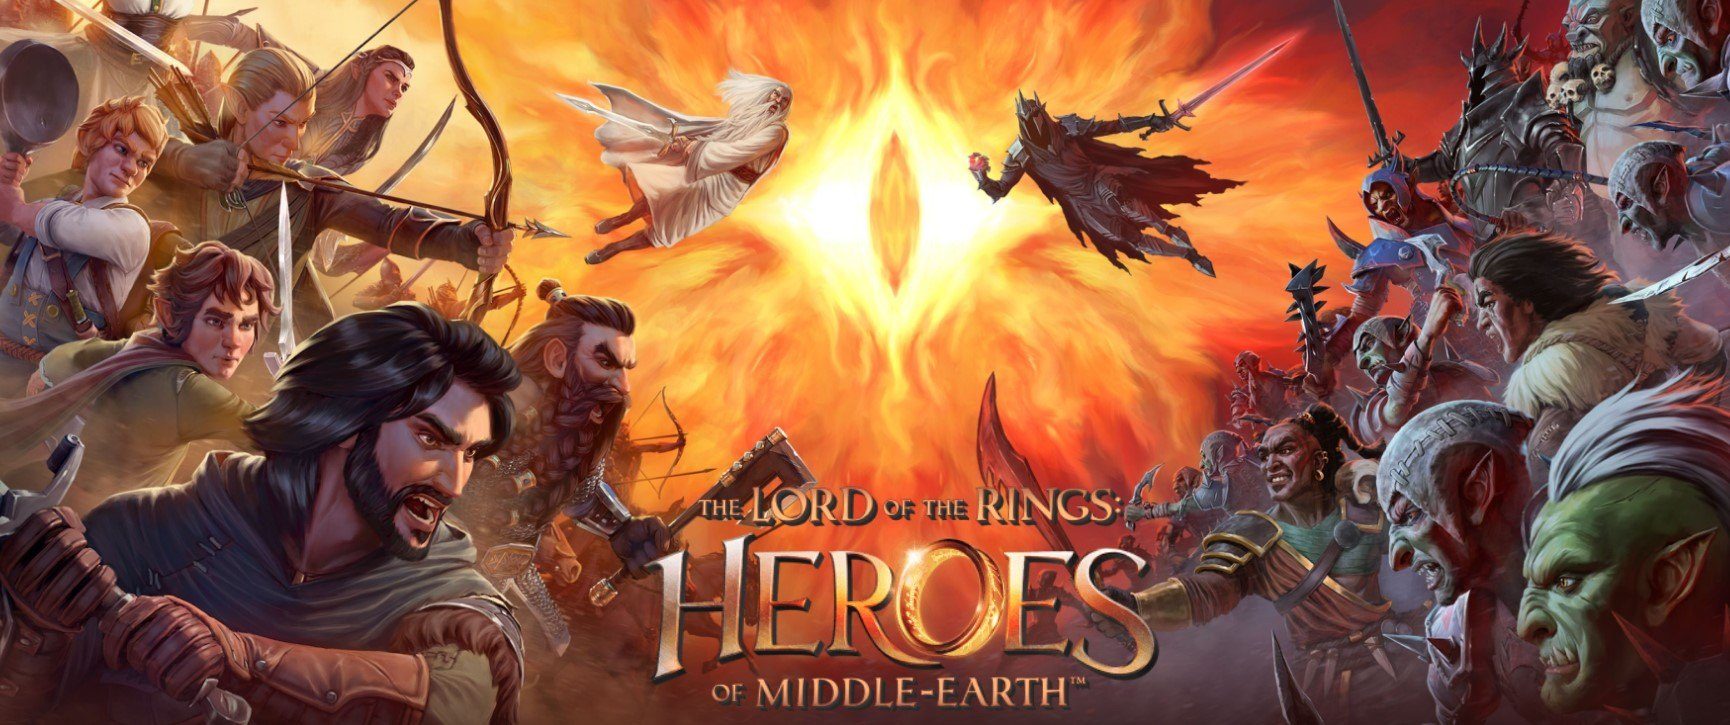 The Lord of the Rings: Heroes of Middle Earth Tierliste - Benutze die besten Charaktere